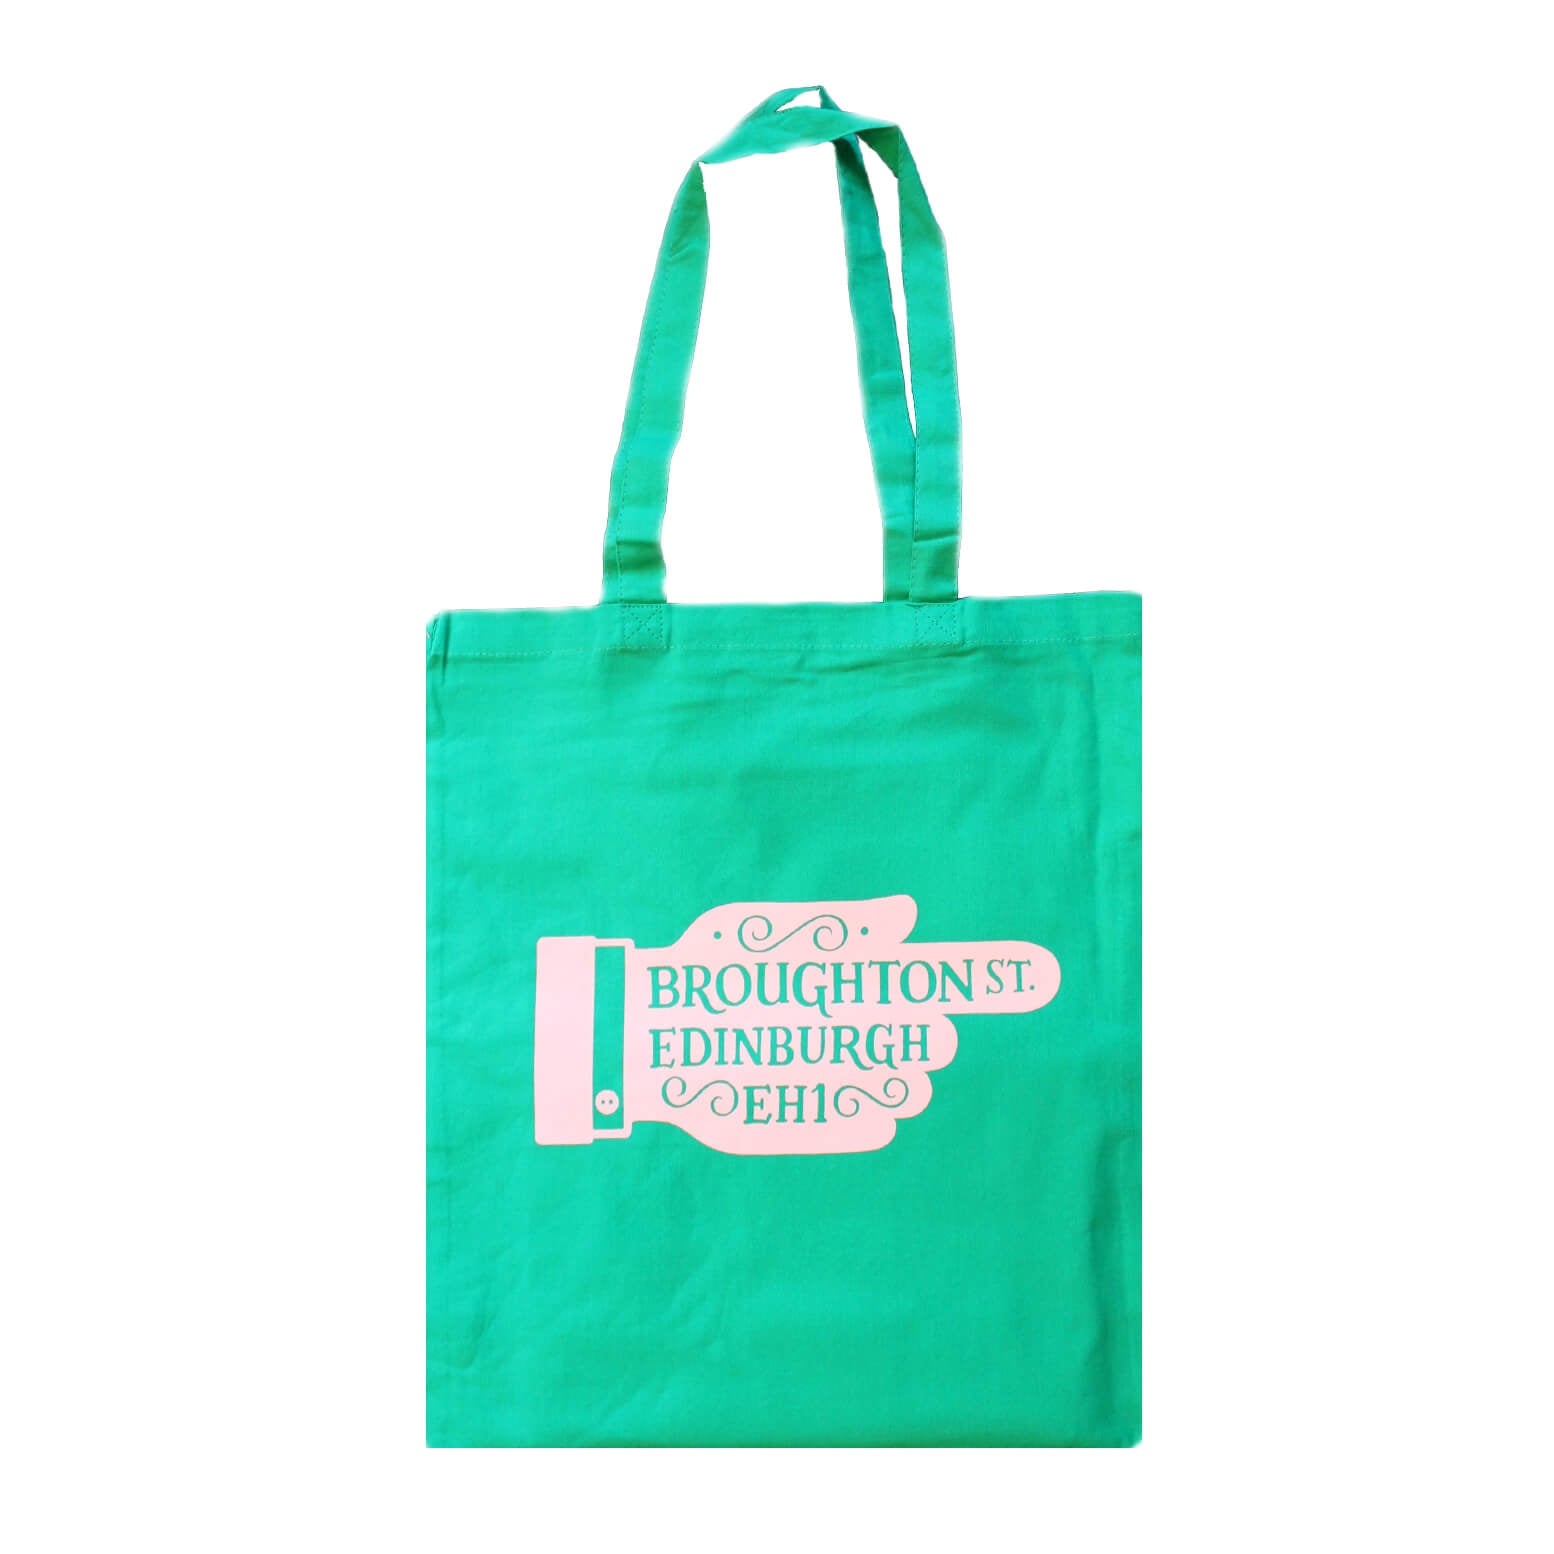 Broughton Street Tote Bag | All Money Goes to Charity XXXX | Green & Pink - Lifestory - Lifestory